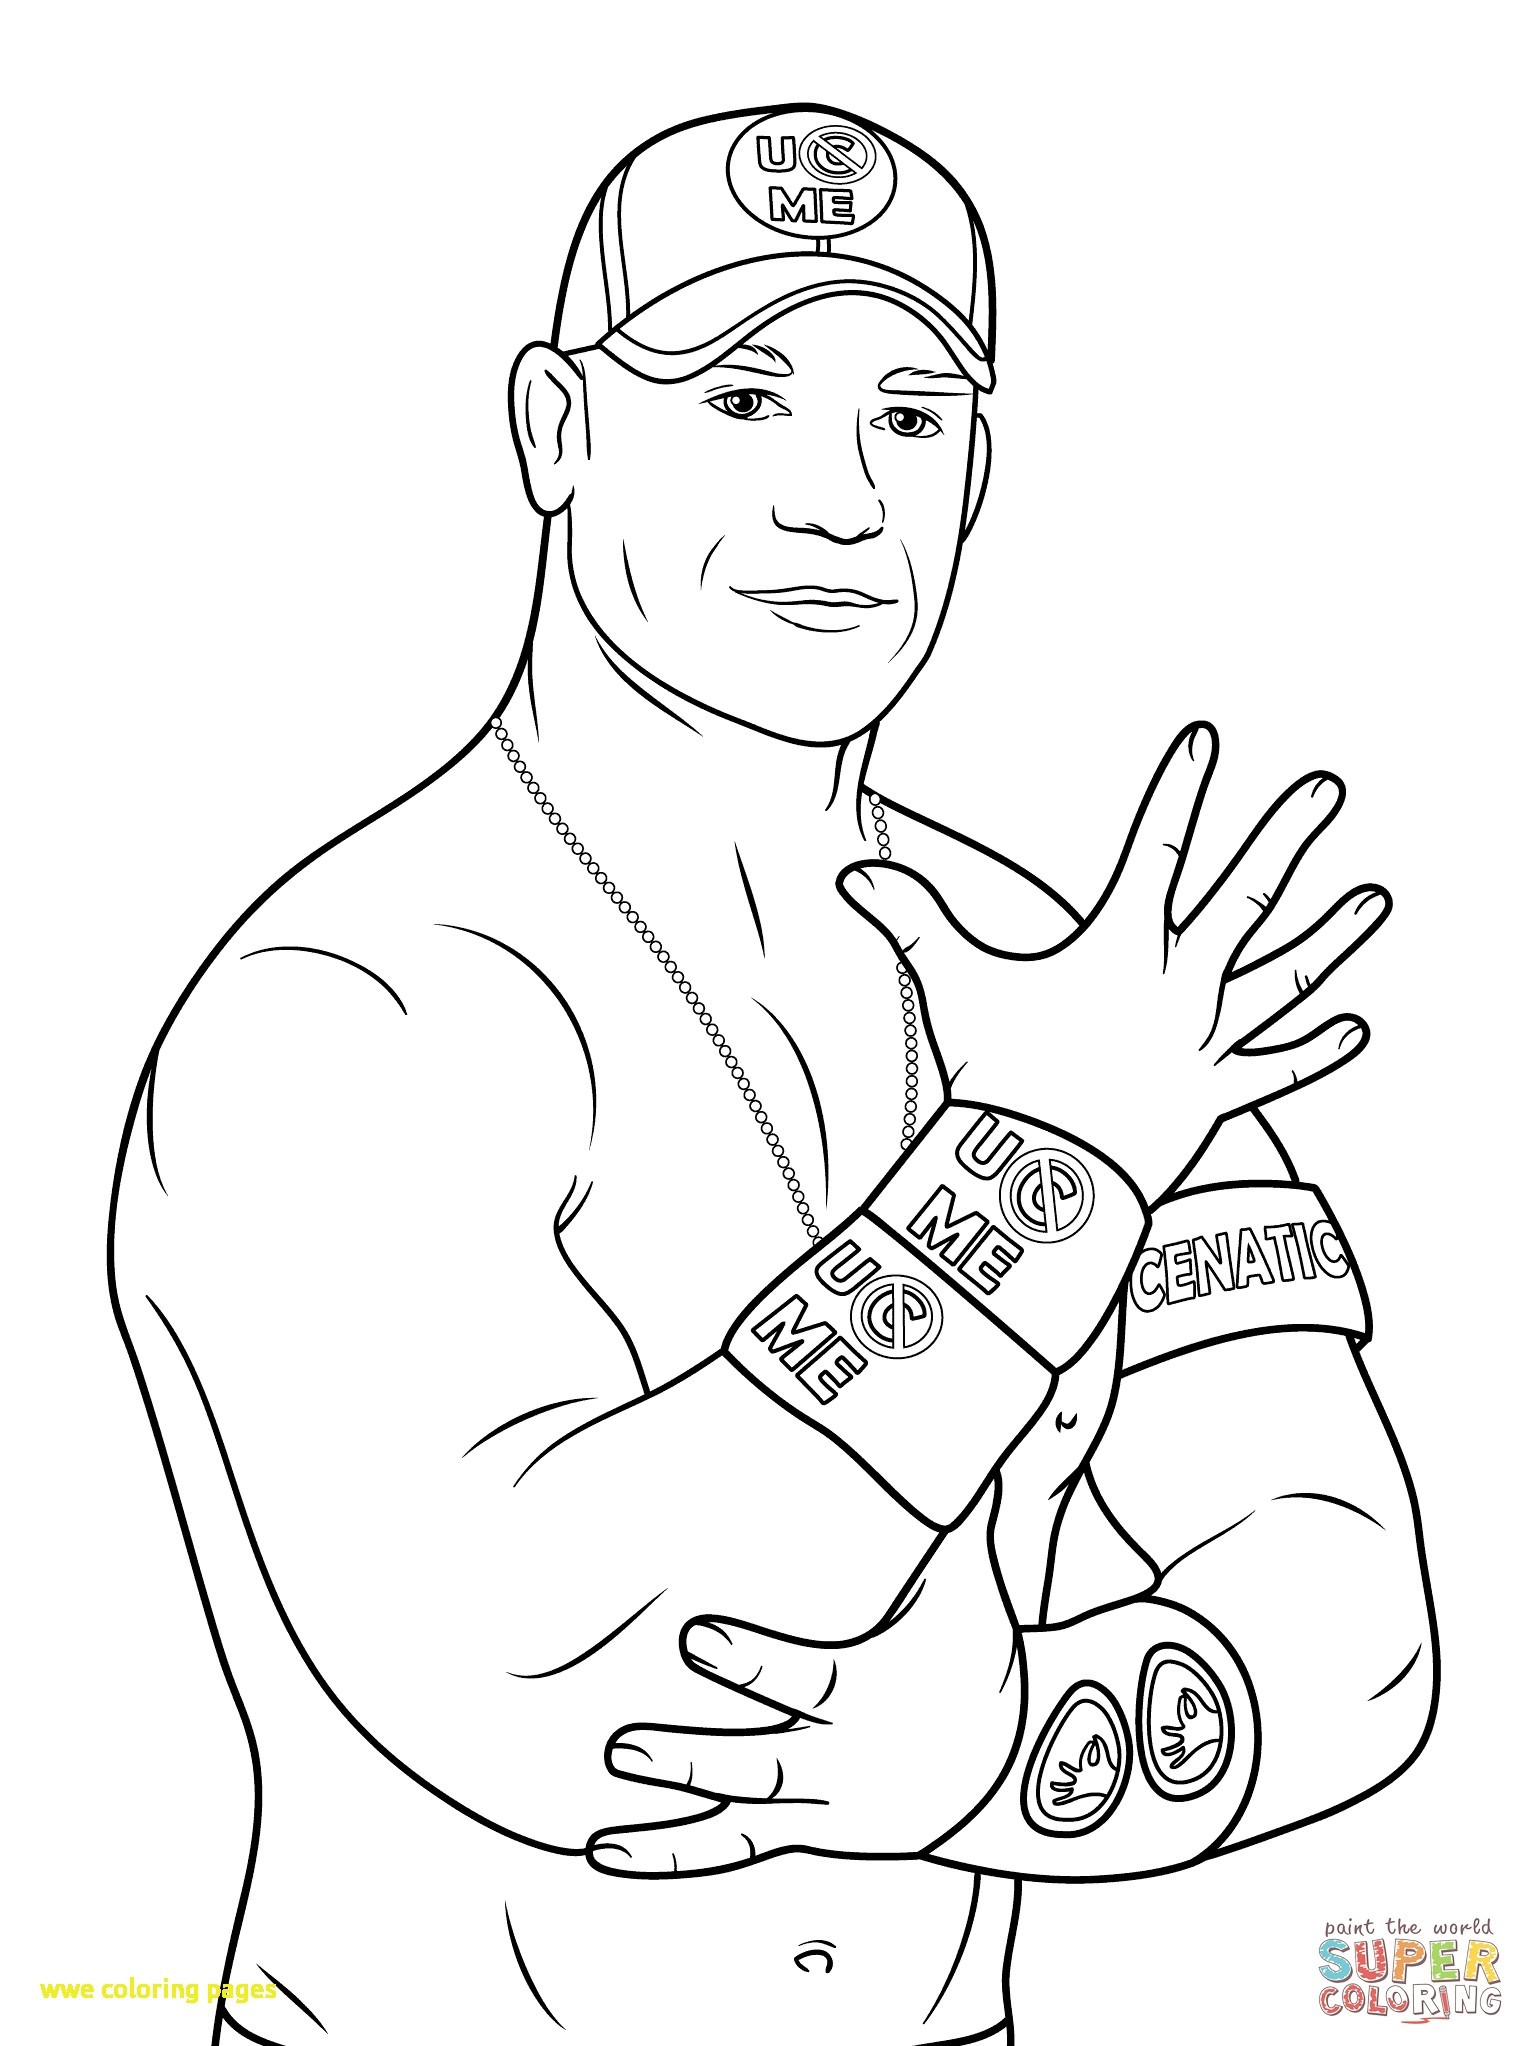 Wwe Ryback Coloring Pages at GetDrawings Free download